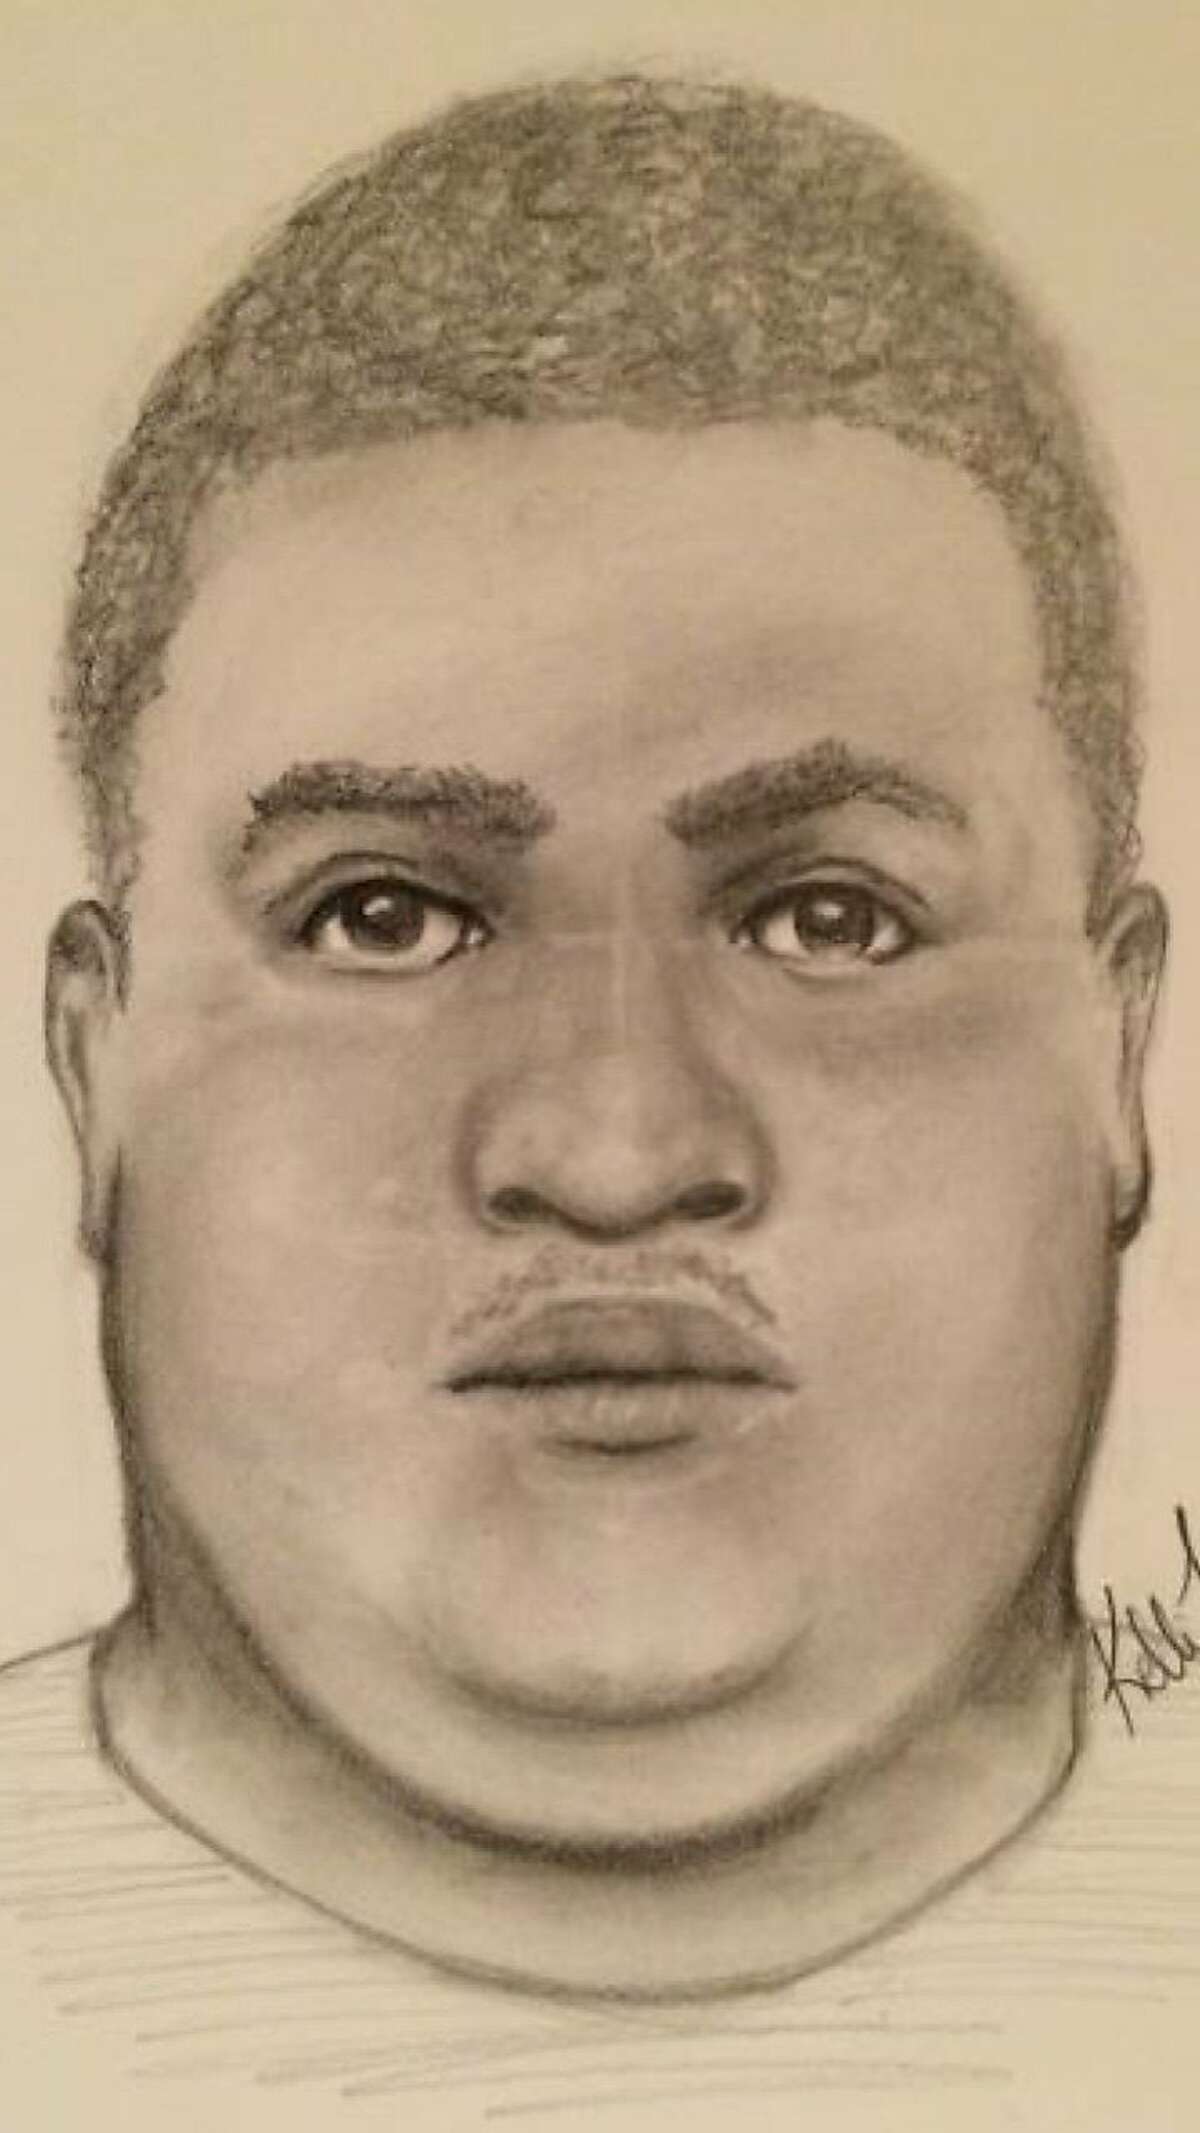 Police sketch of man sought in the 2014 slaying of Ayana Dominguez